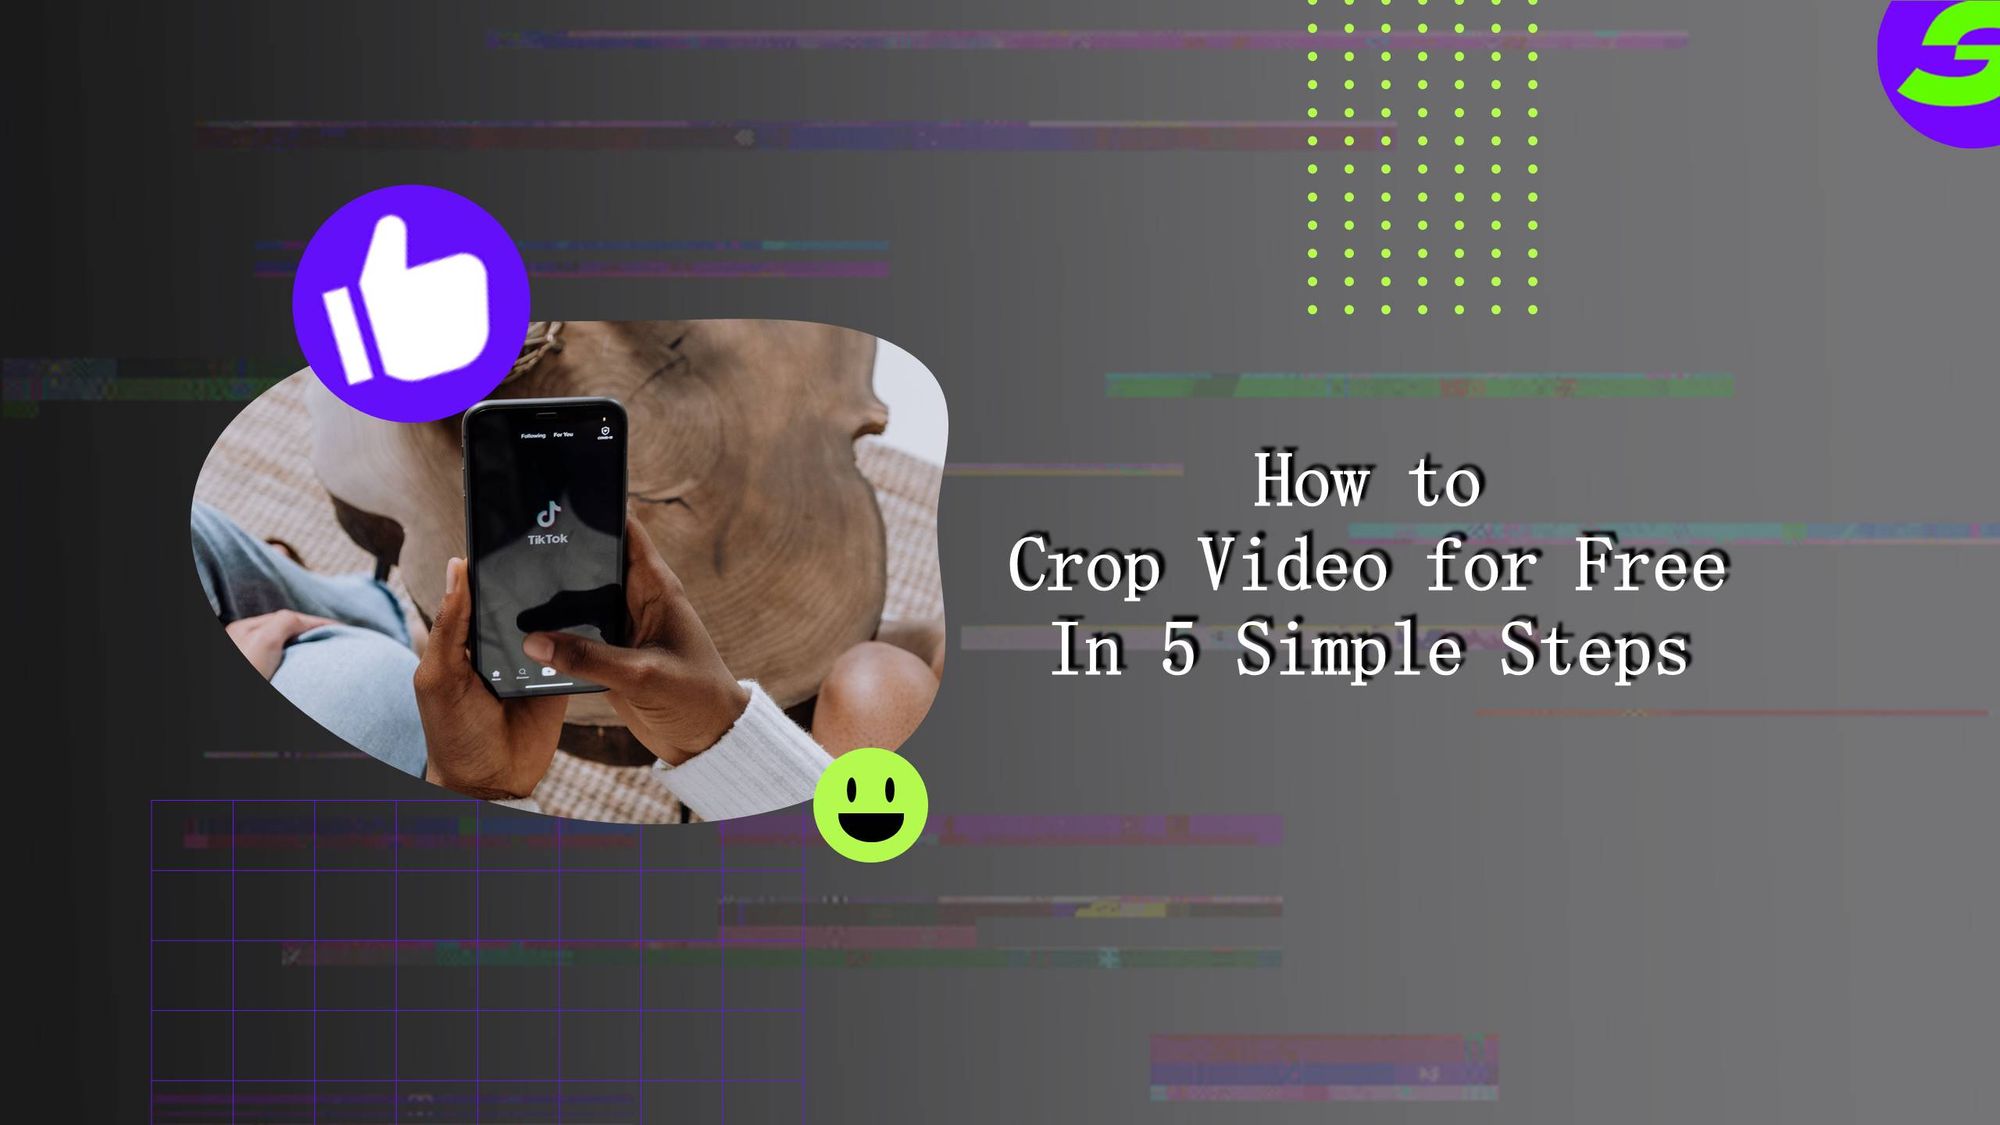 How to Crop Video for Free using ShotCut Free Video Editor on A